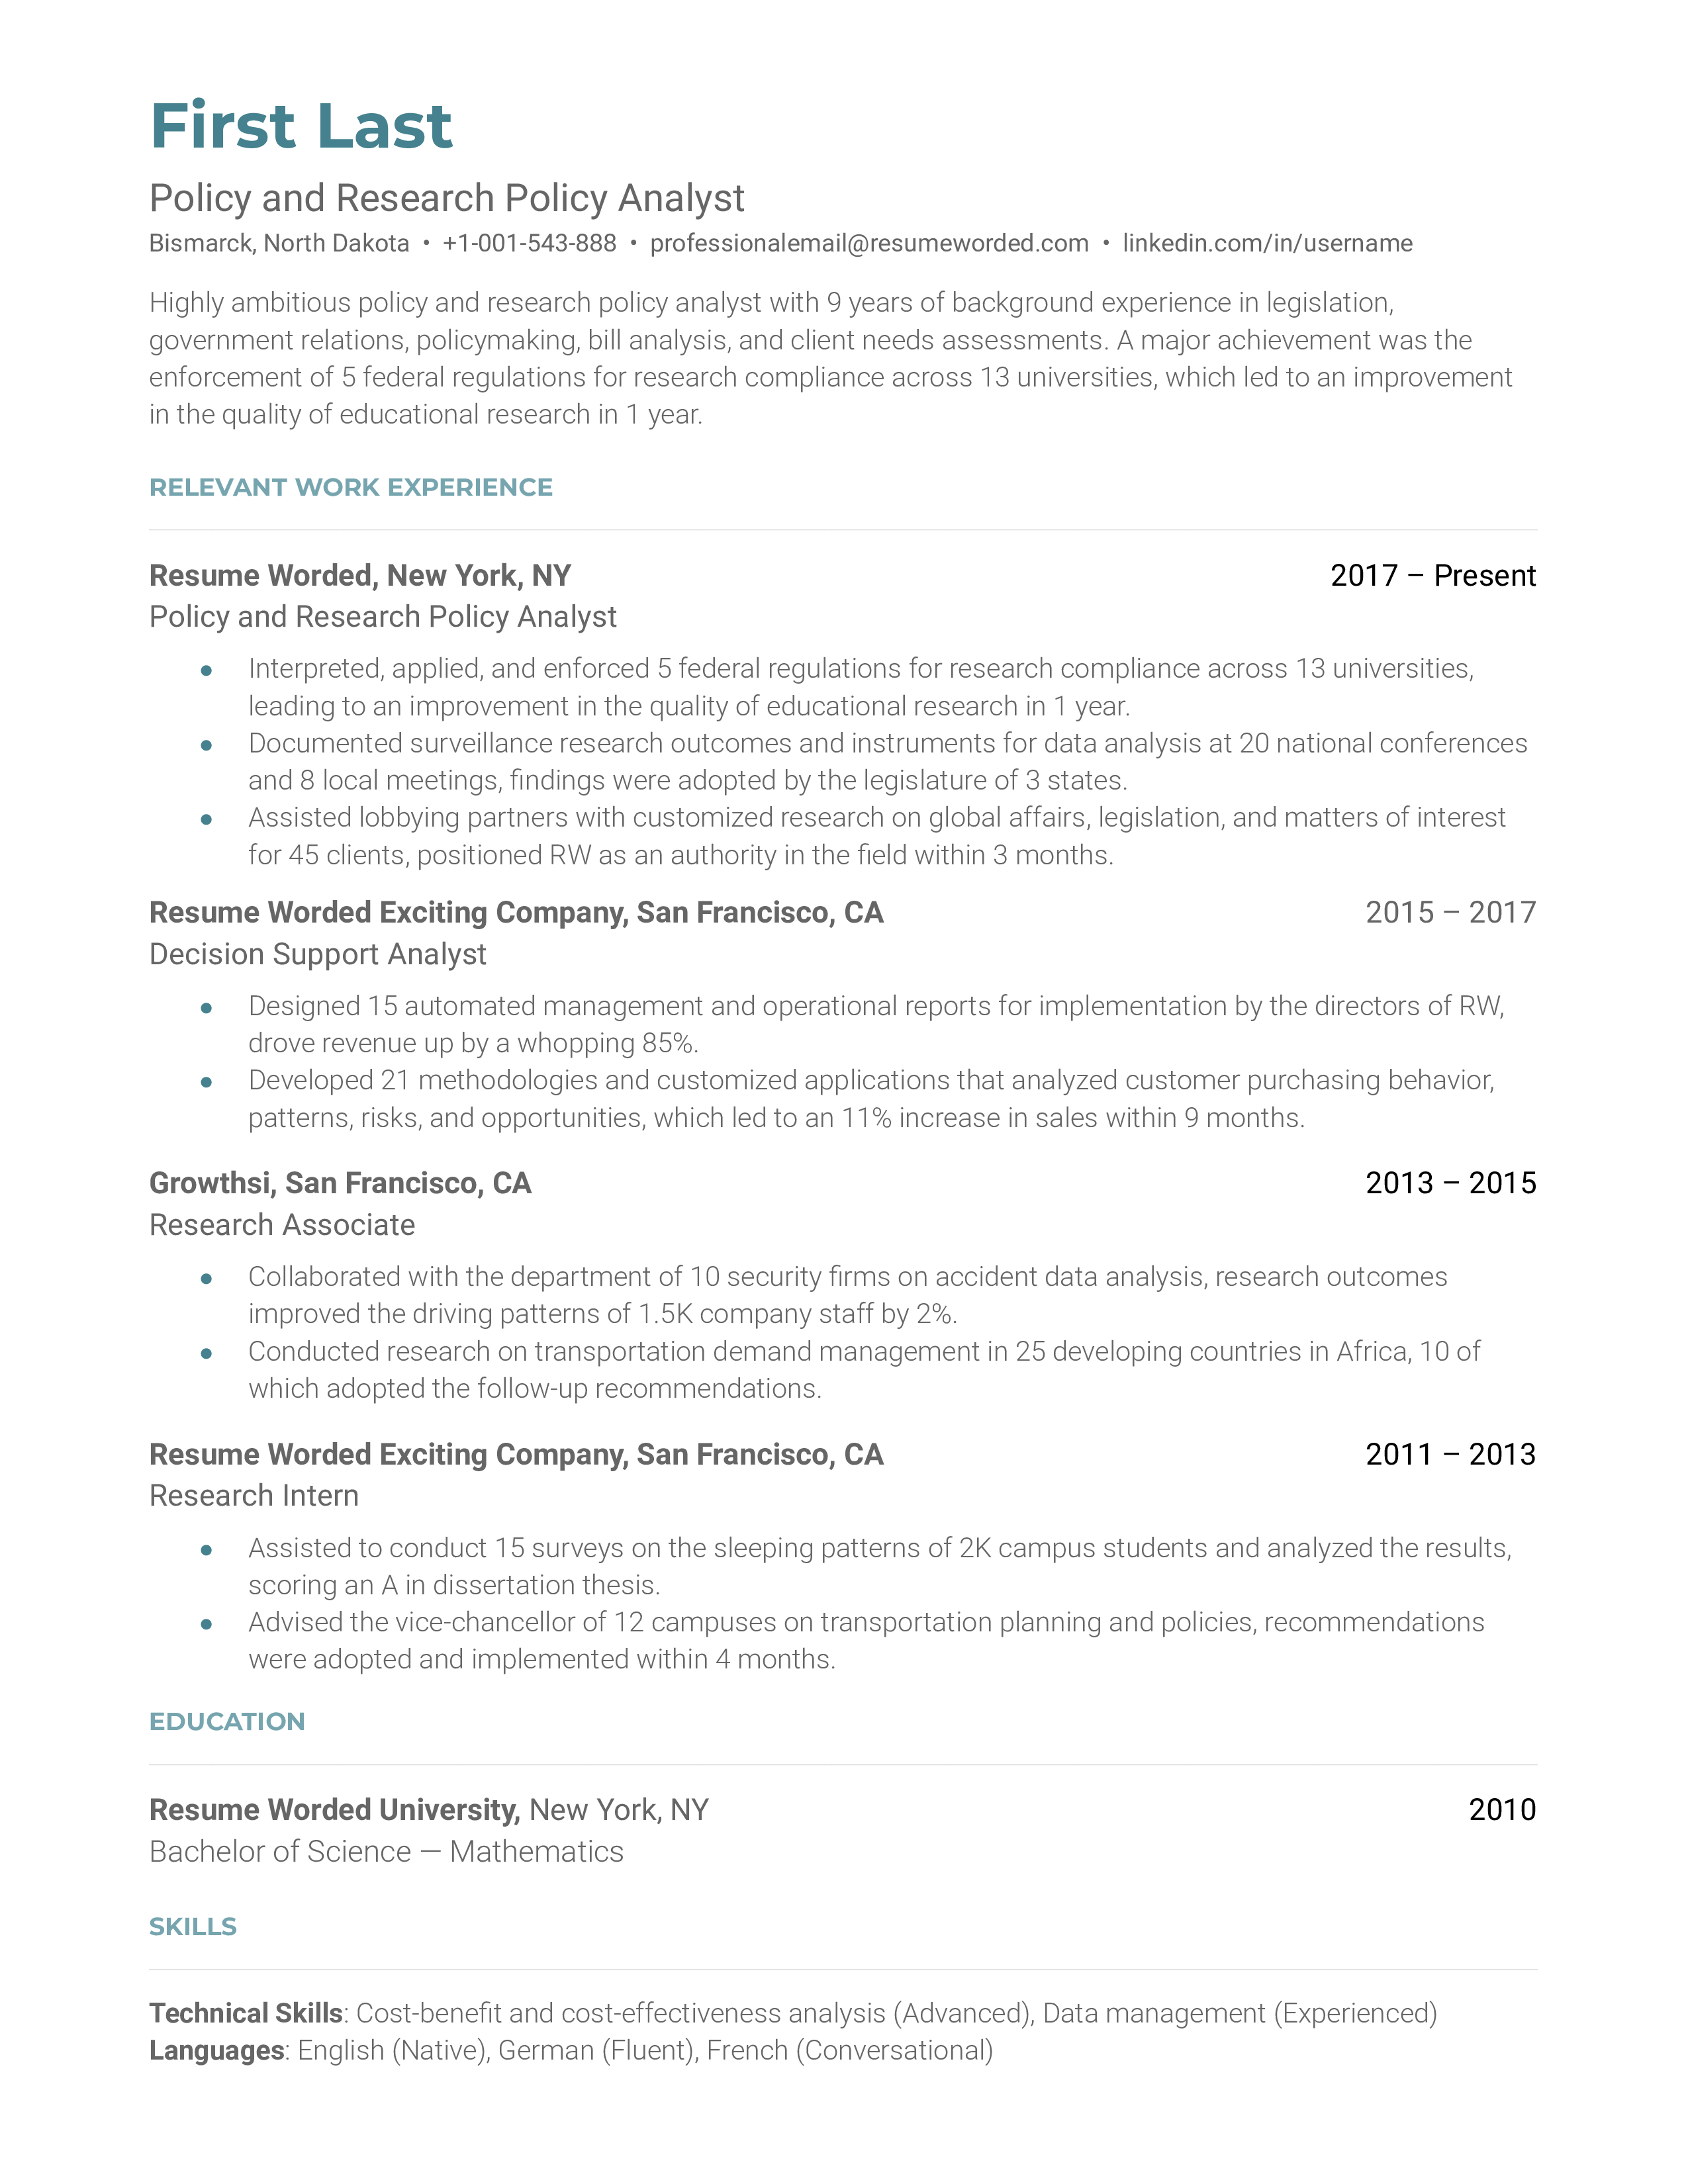 Policy and Research Policy Analyst Resume Sample